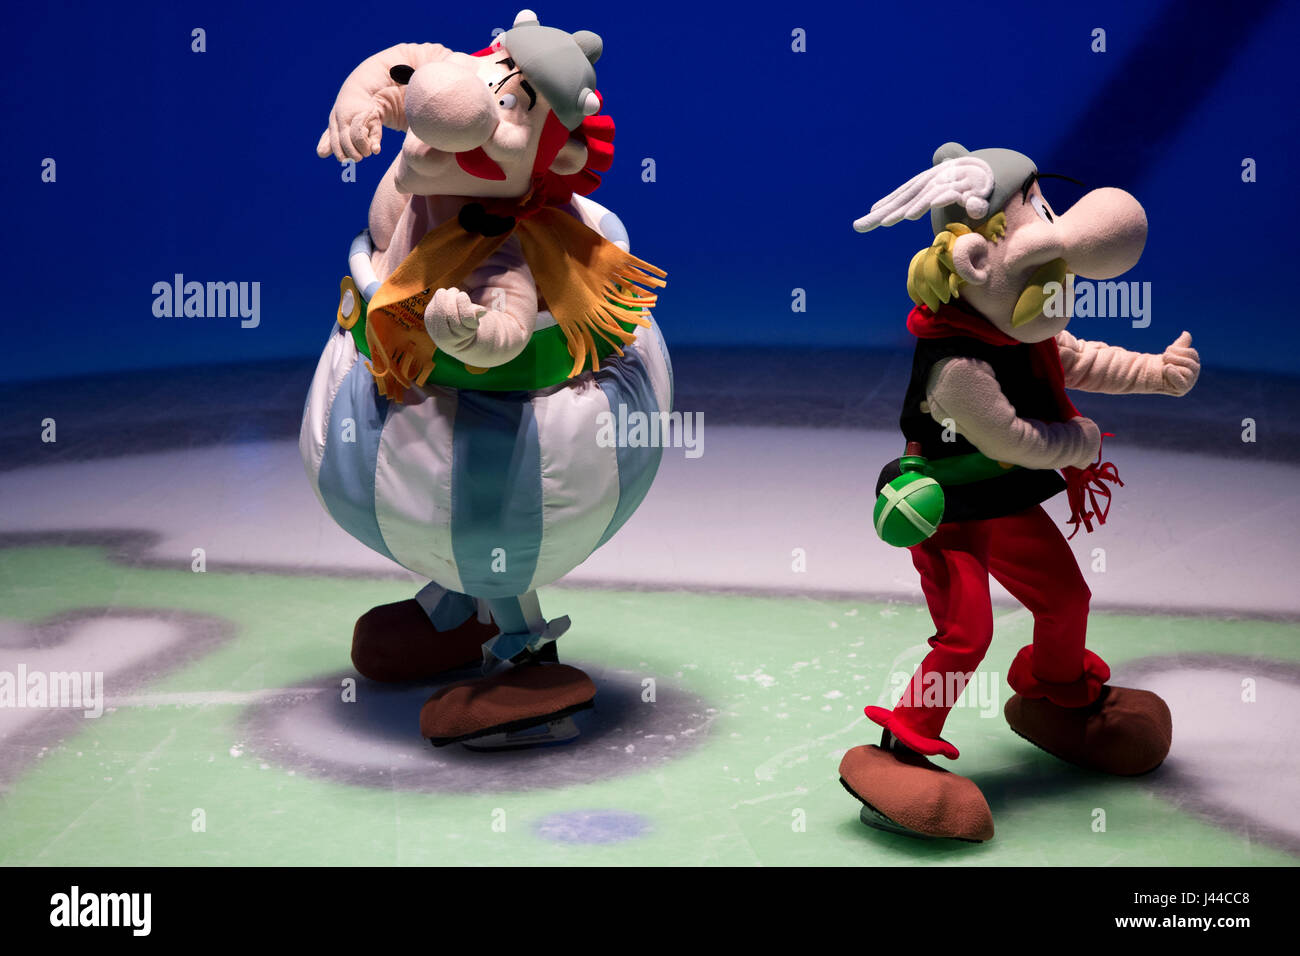 Mascot Obelix, left, and Asterix on ice prior to the Ice Hockey World Championships match Czech Republic vs Finland, in Paris, France, on May 8, 2017. Stock Photo